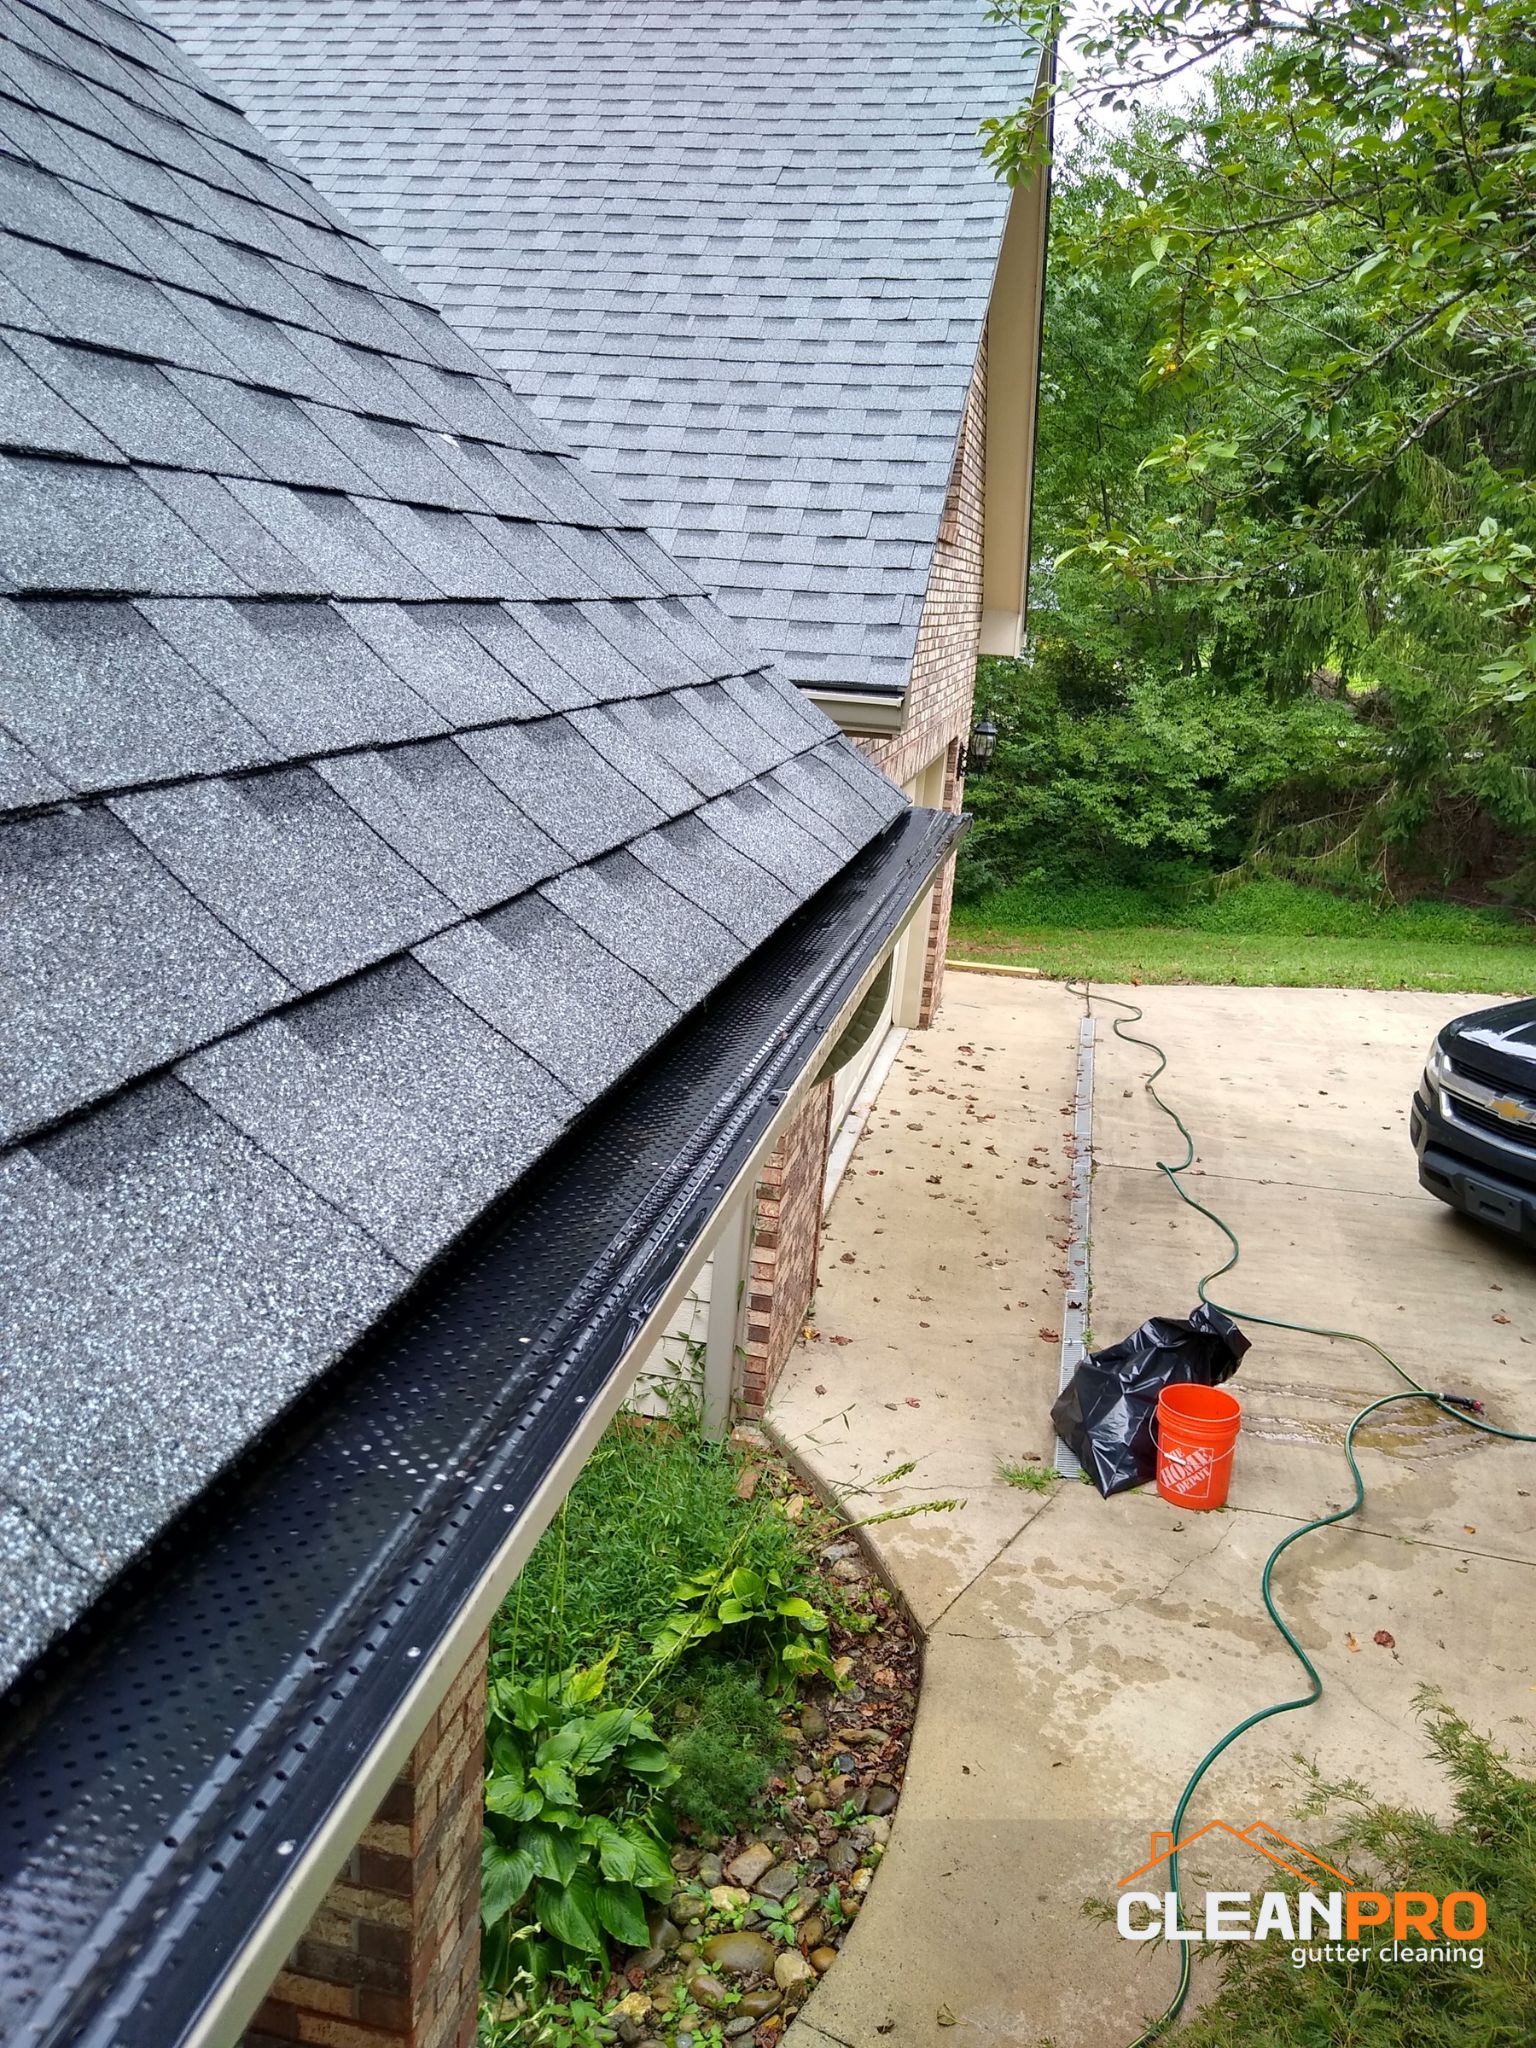 Top Notch Gutter Cleaning Service in Cheasapeake